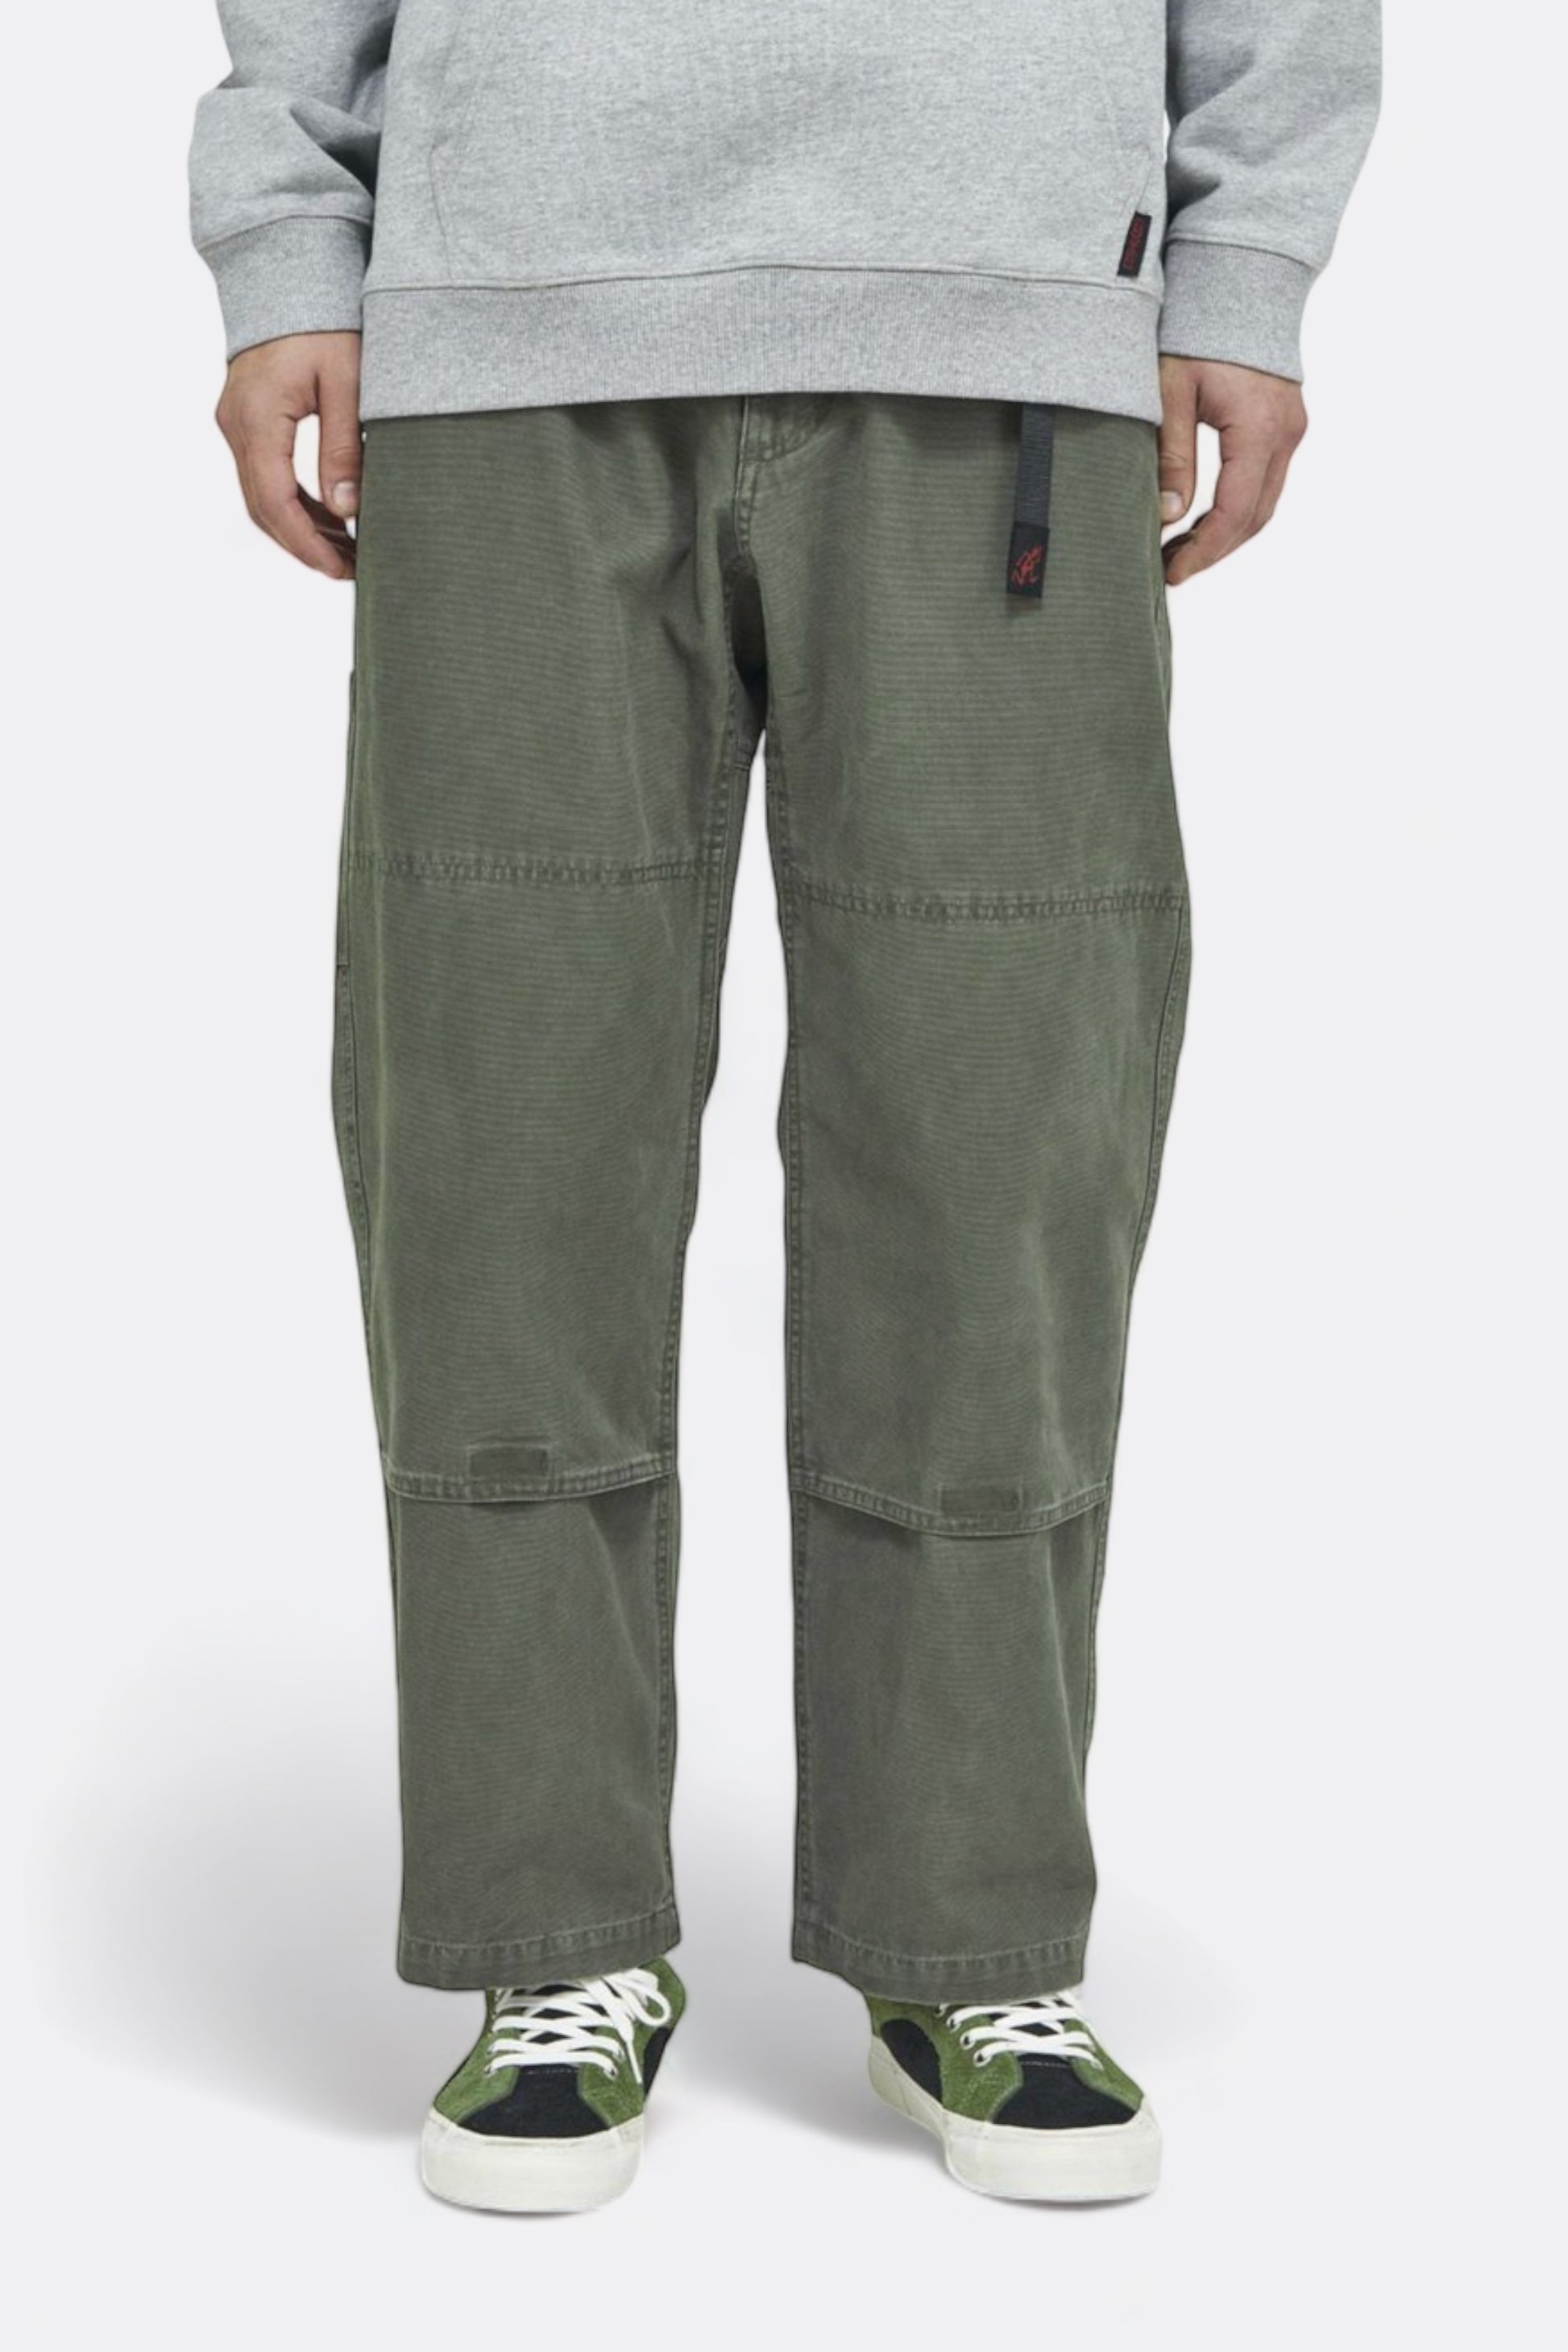 Gramicci - Canvas Double Knee Pant (Dusted Slate)